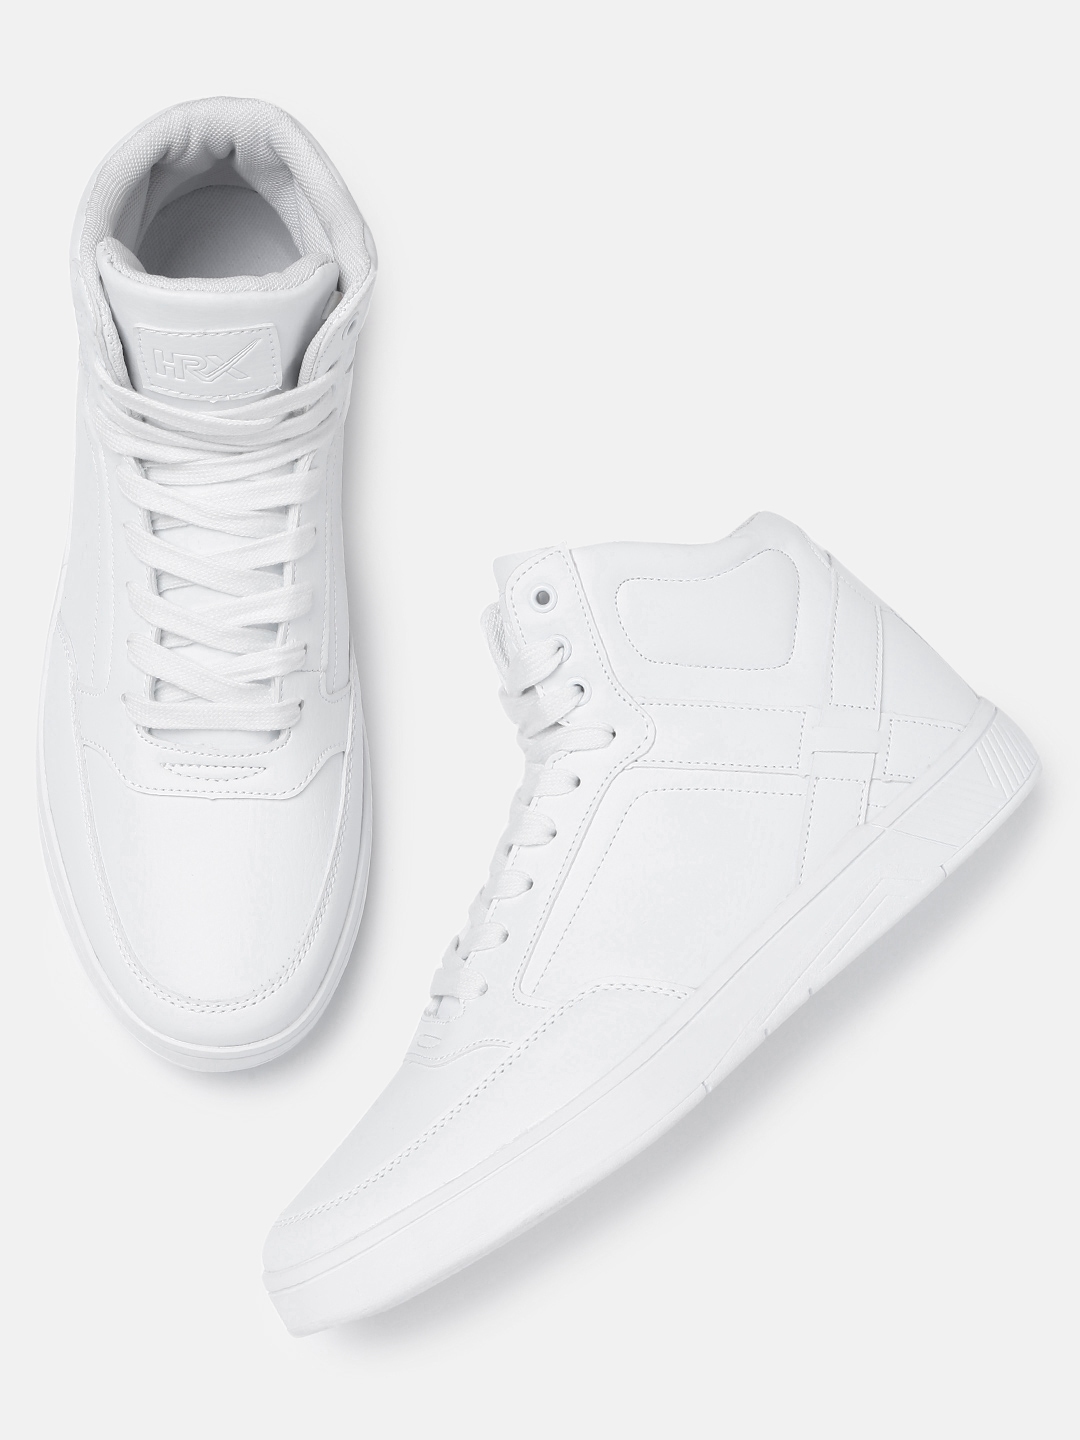 hrx white shoes casual - 53% OFF 